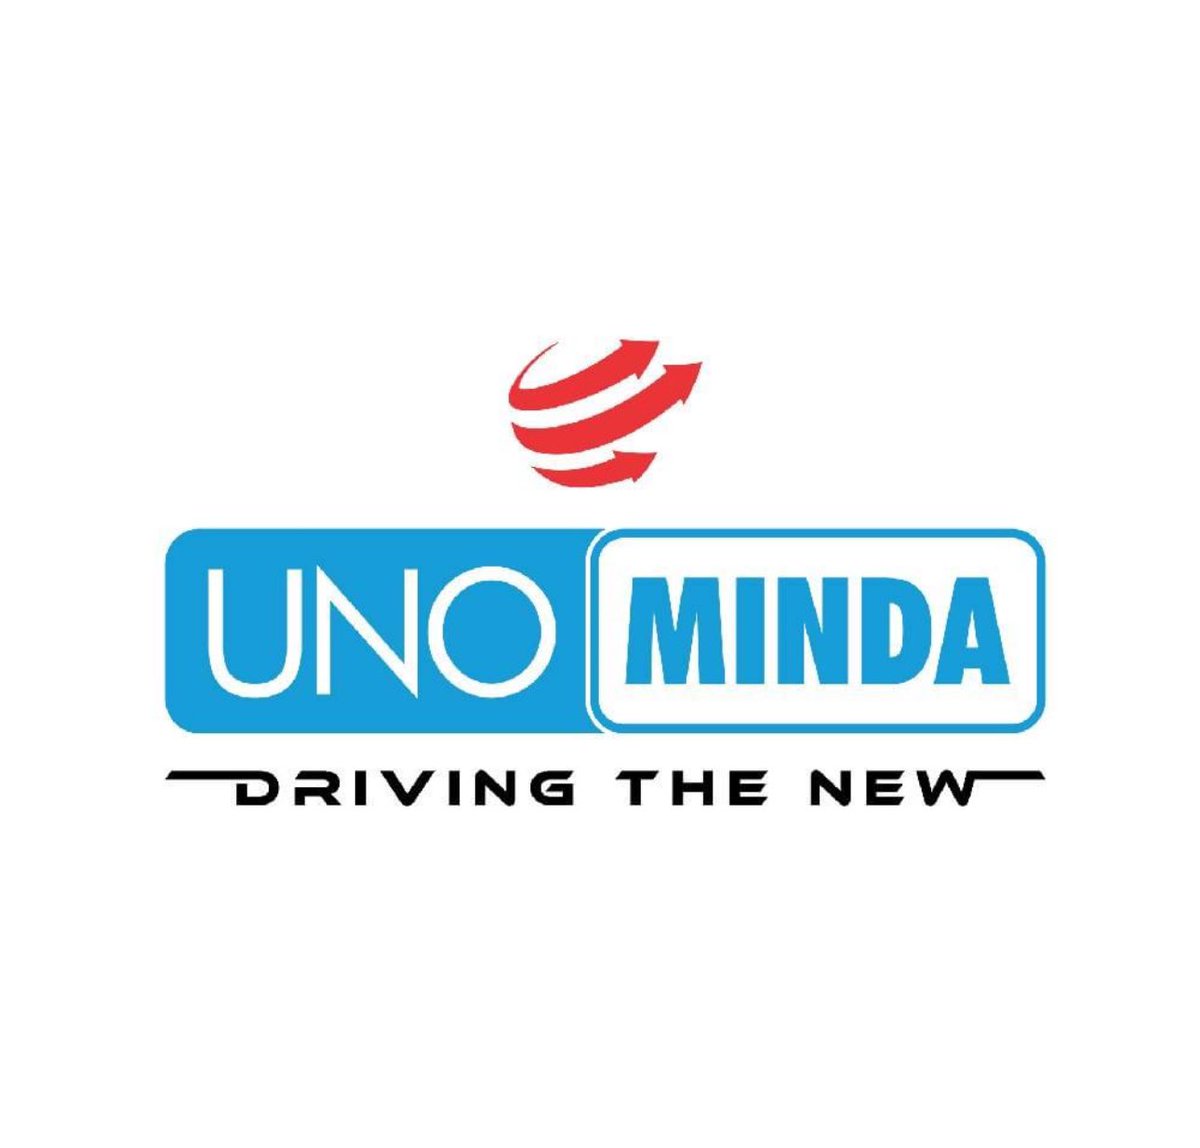 ✍️Uno Minda 

Company signs Technical License Agreement (TLA) with starcharge Energy Pte. to manufacture & sale Electric Vehicle Supply Equipment (EVSE) in India

#Unominda